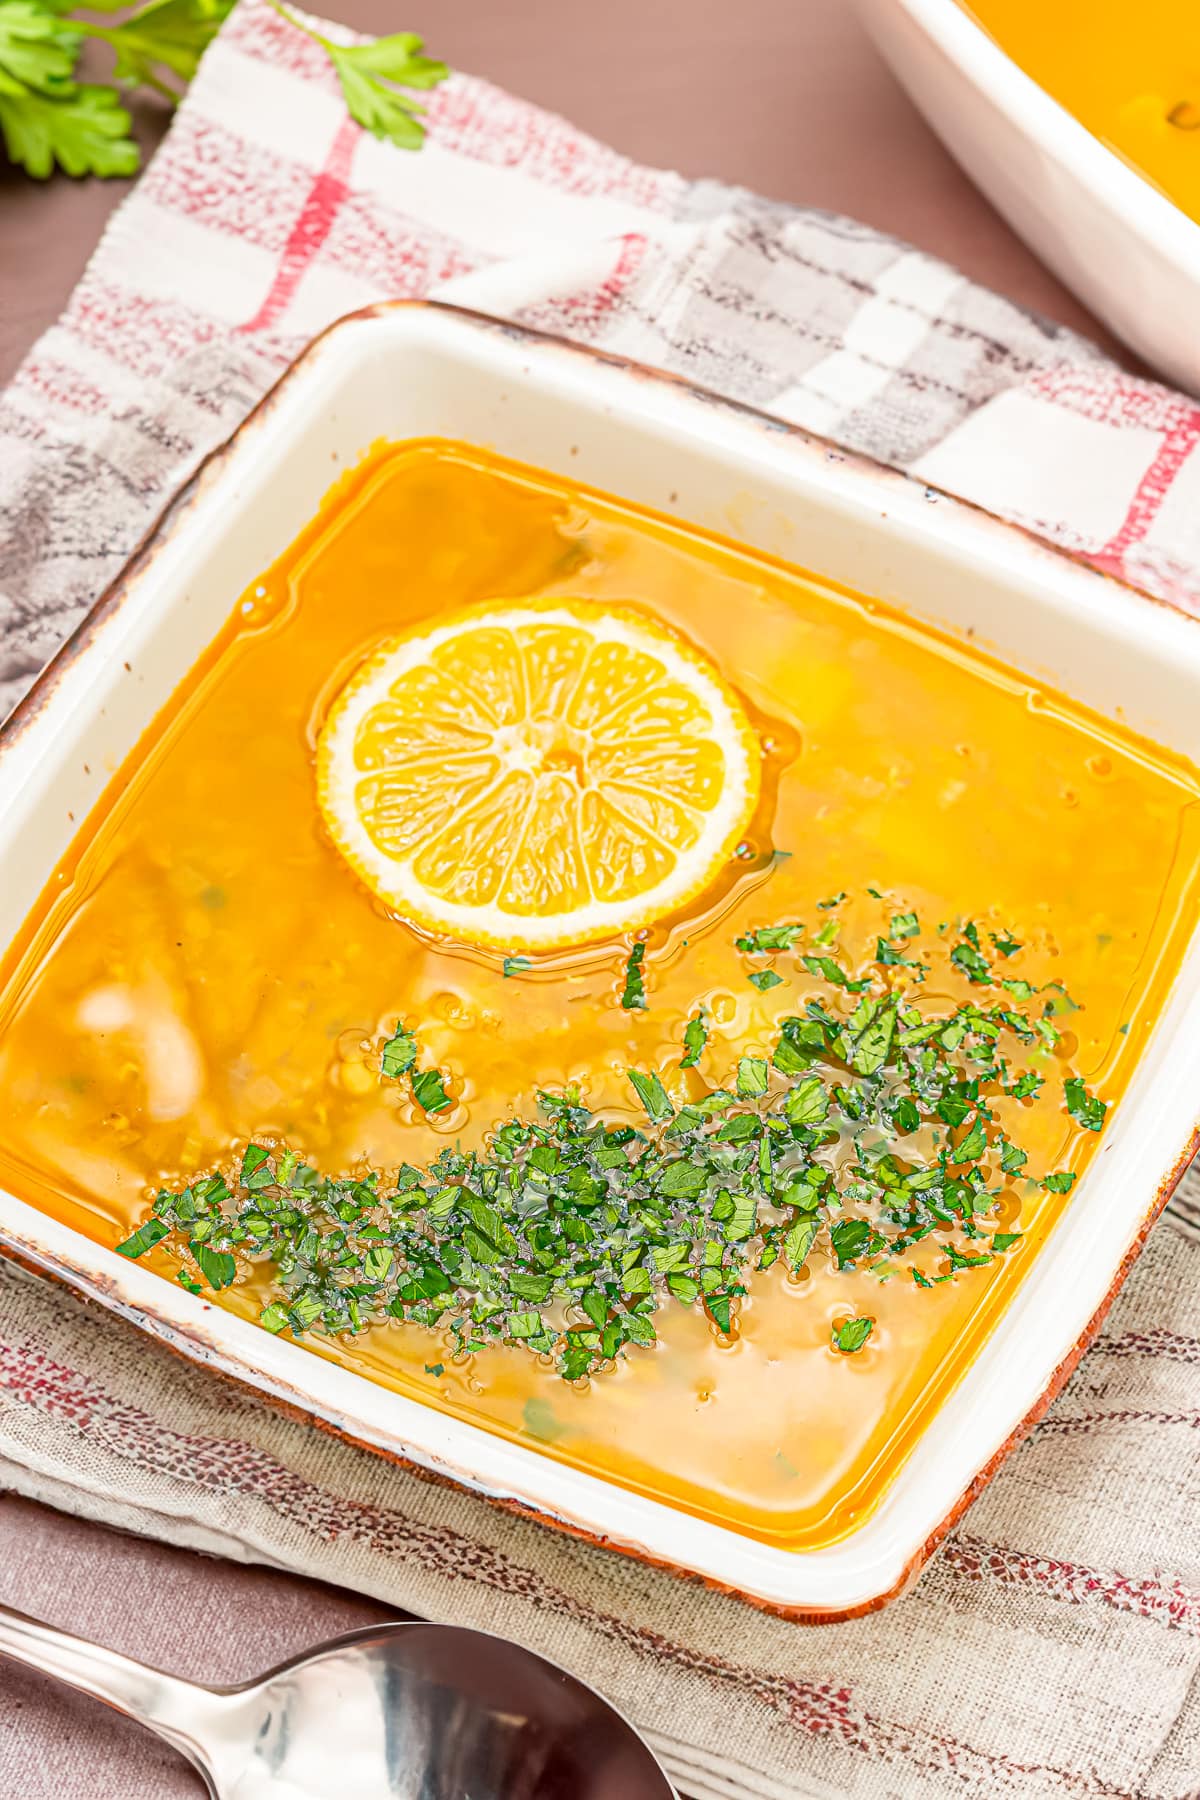 Rectangular dish filled with lentil soup garnished with a lemon slice and chopped herbs.